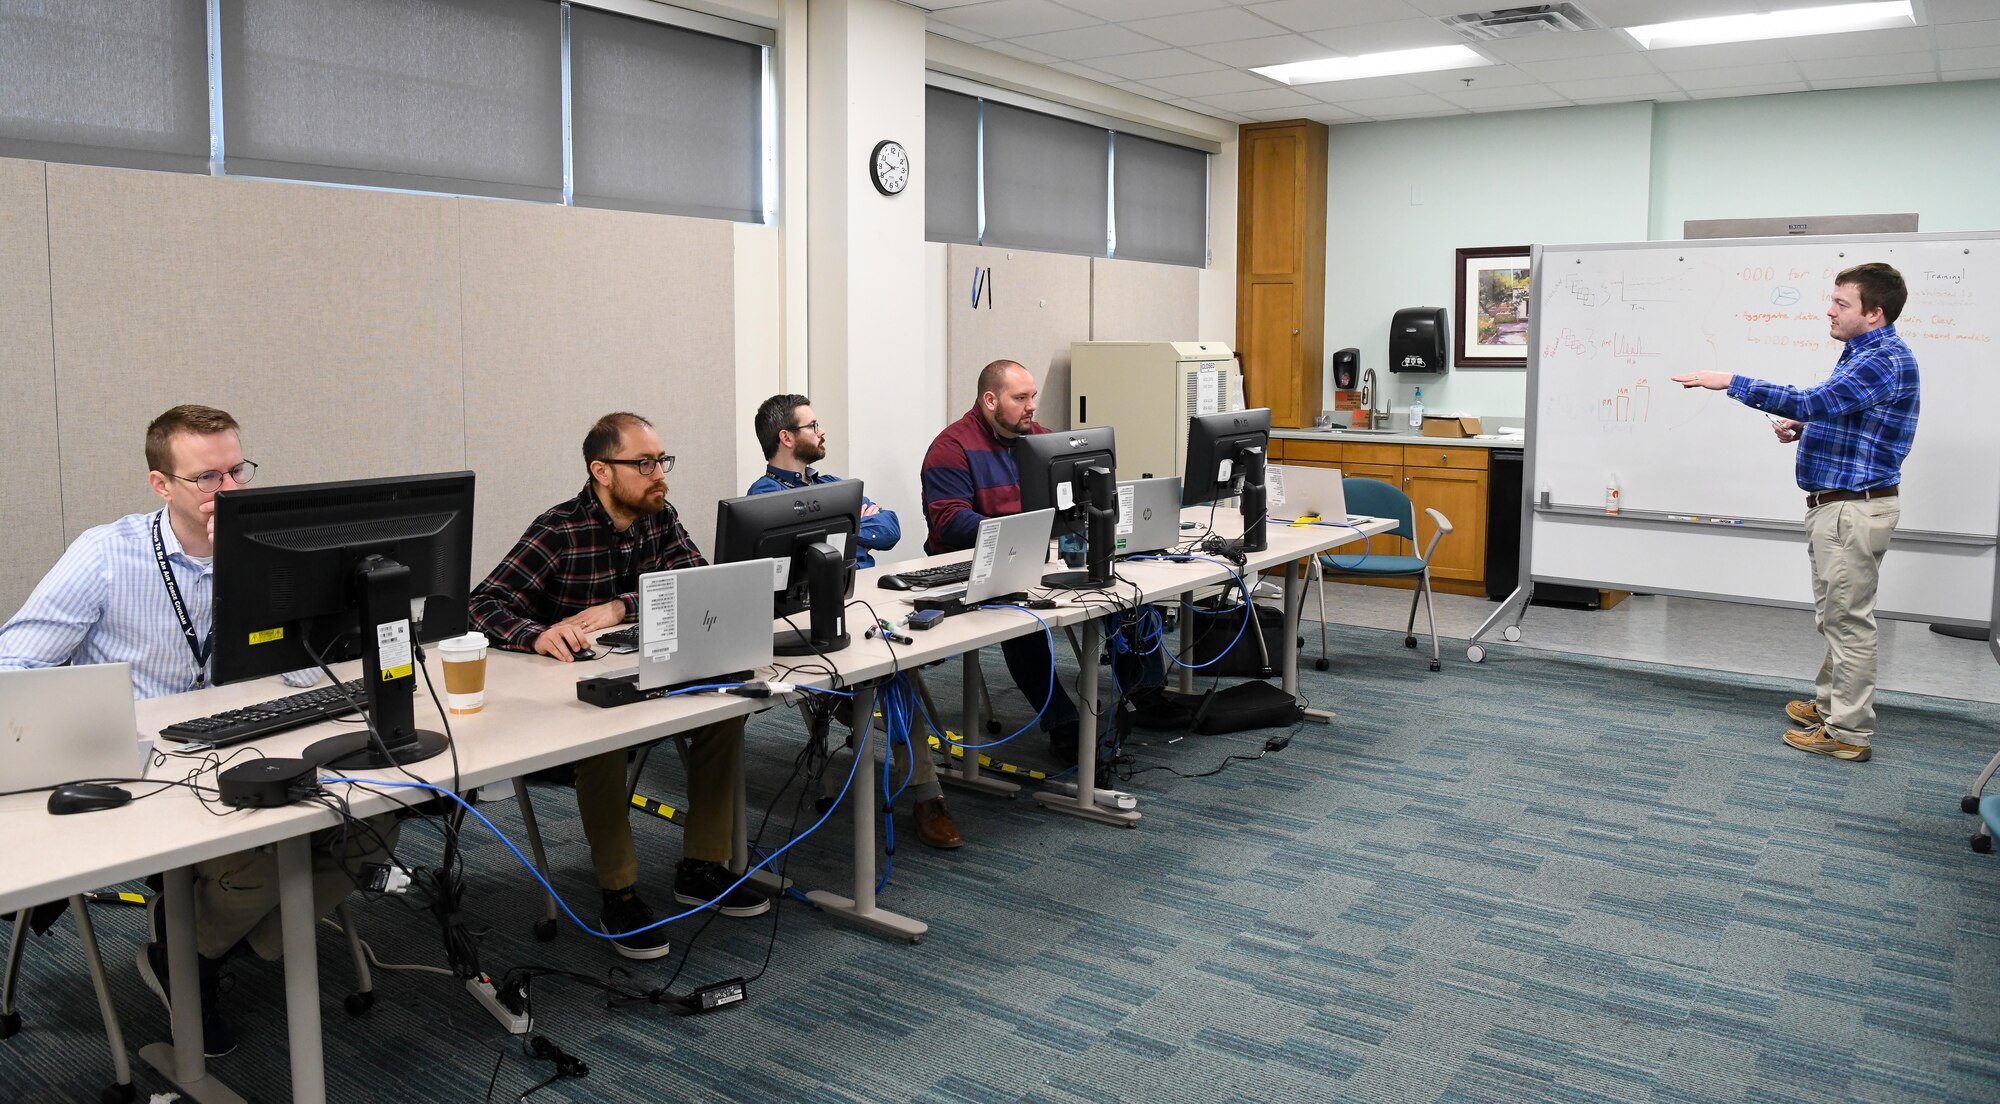 Dr. Justin Garrard, right, AEDC team member, leads a discussion with members of the Facility Maintenance Data Analysis team during the Air Force Test Center Data Hackathon, March 15, 2022.